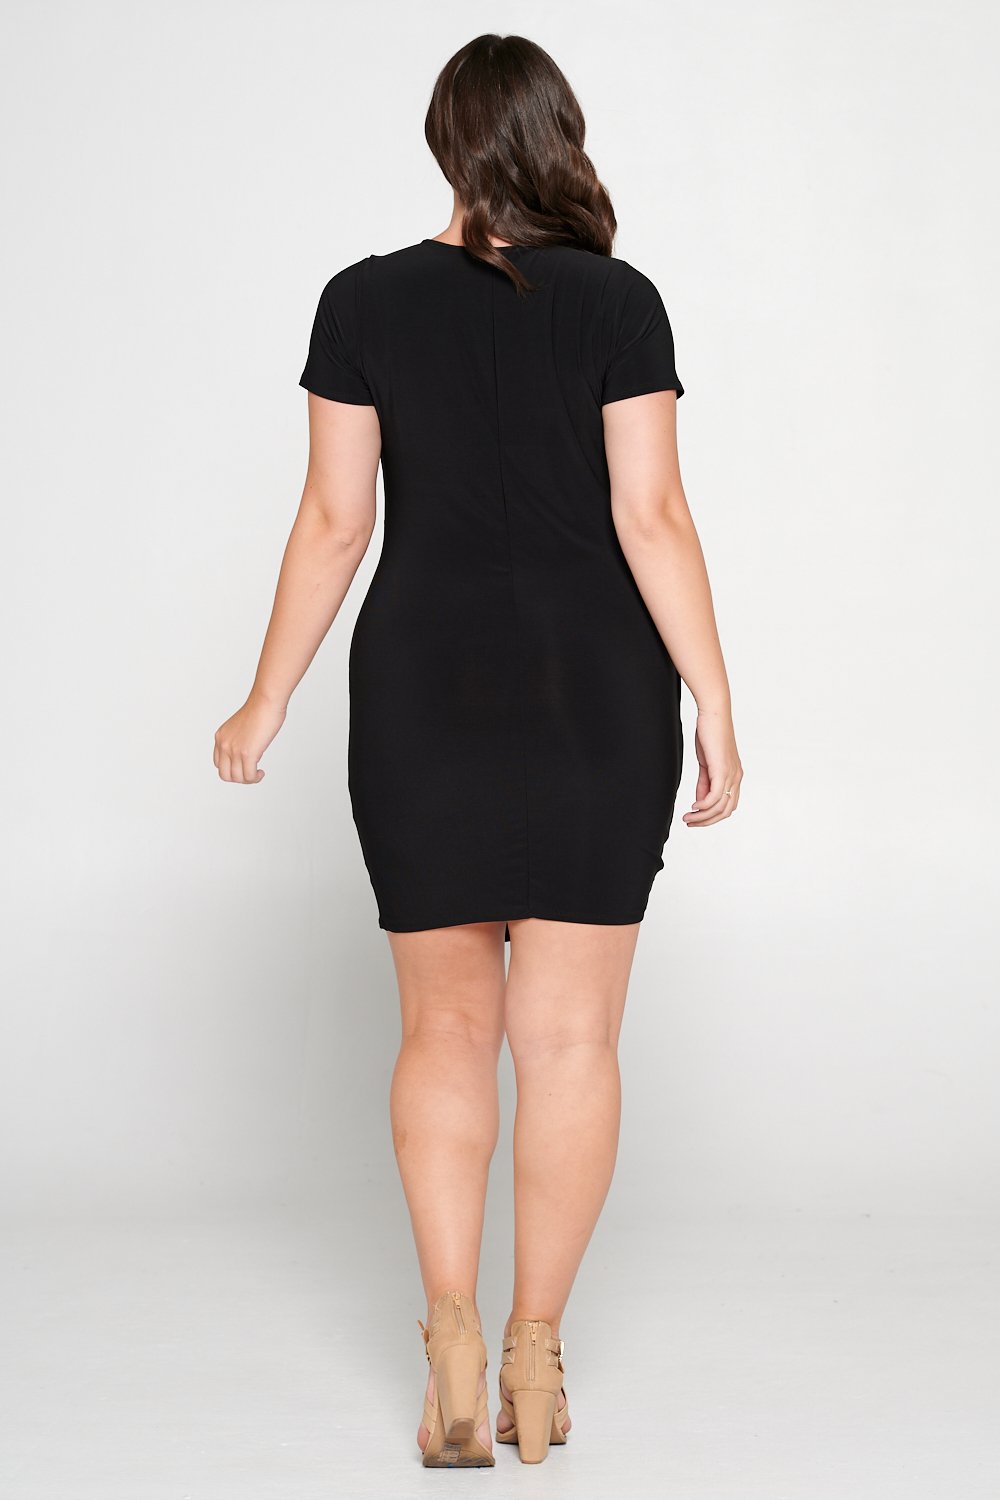 livd L I V D women's trendy contemporary plus size  ruched mini party dress with draping details ity slingky dress in BLACK